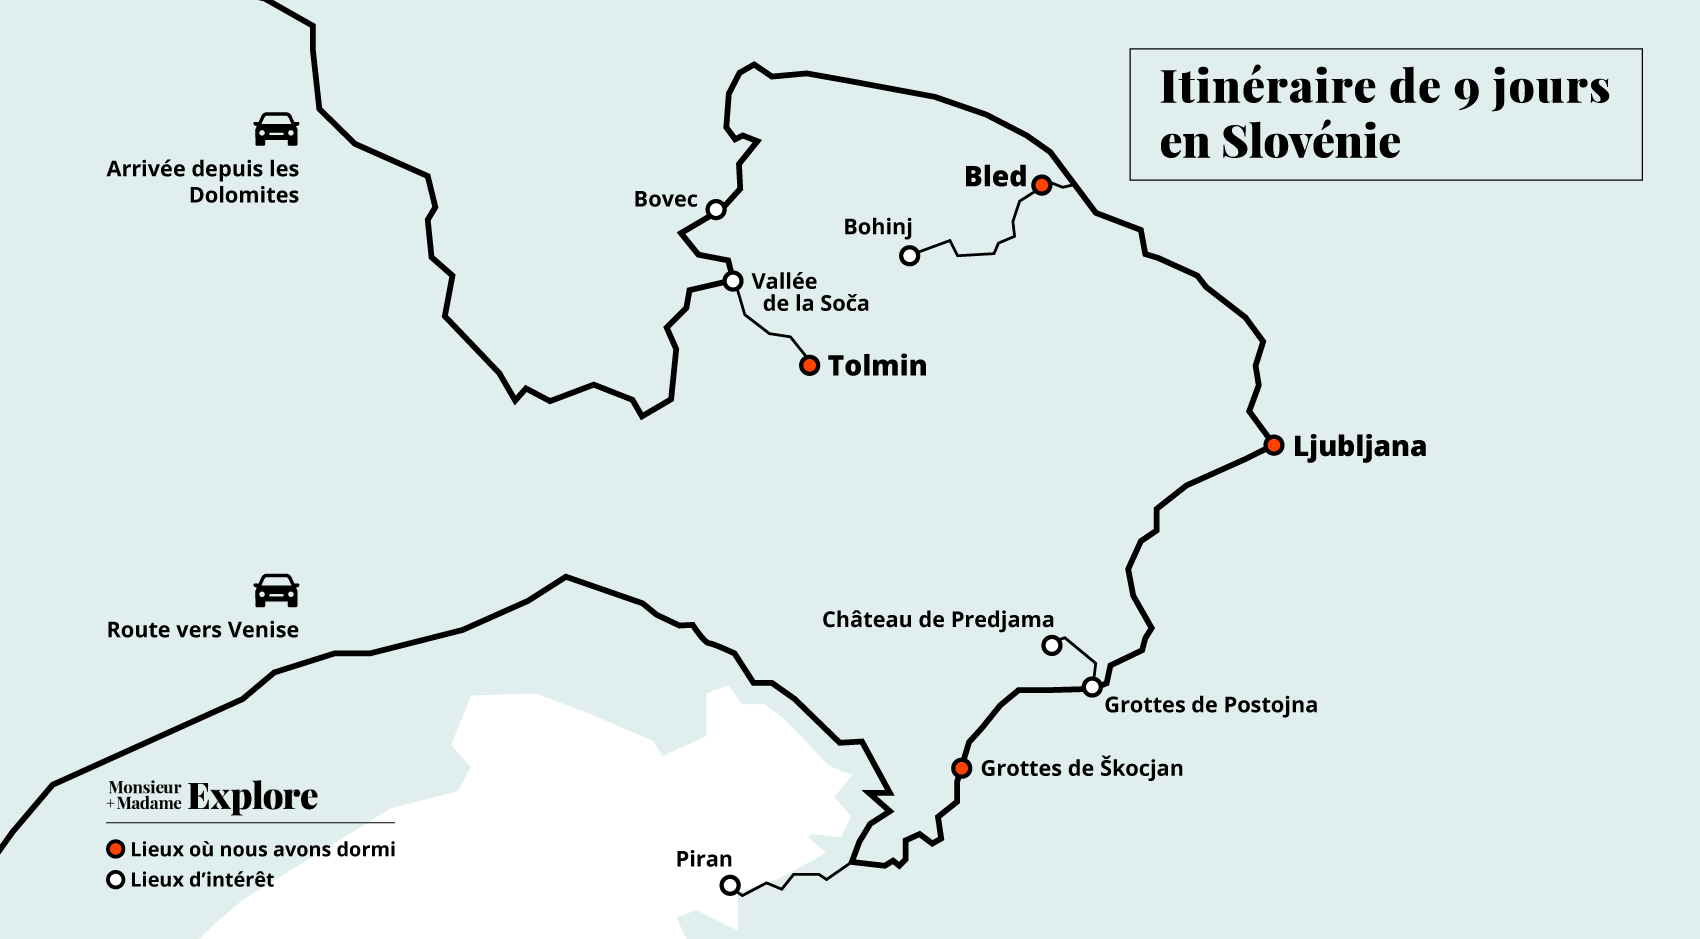 Carte et itinéraire en Slovénie / Map and itinerary in Slovenia